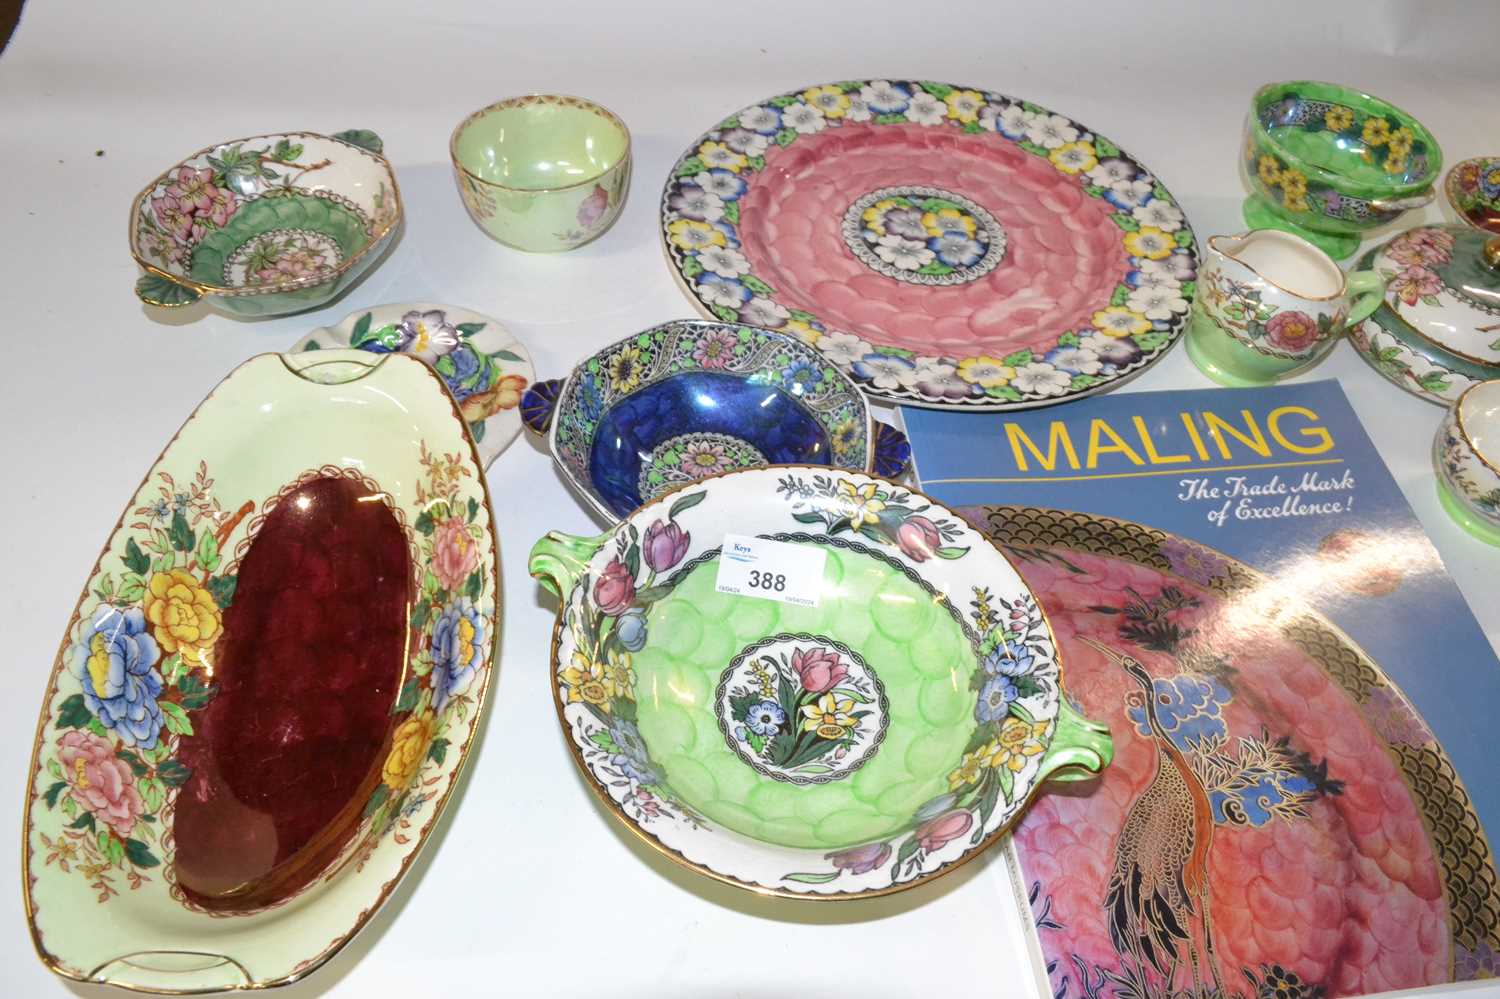 A quantity of Maling lustre wares, various bowls, a plate with floral design, toast rack and jam pot - Image 3 of 4